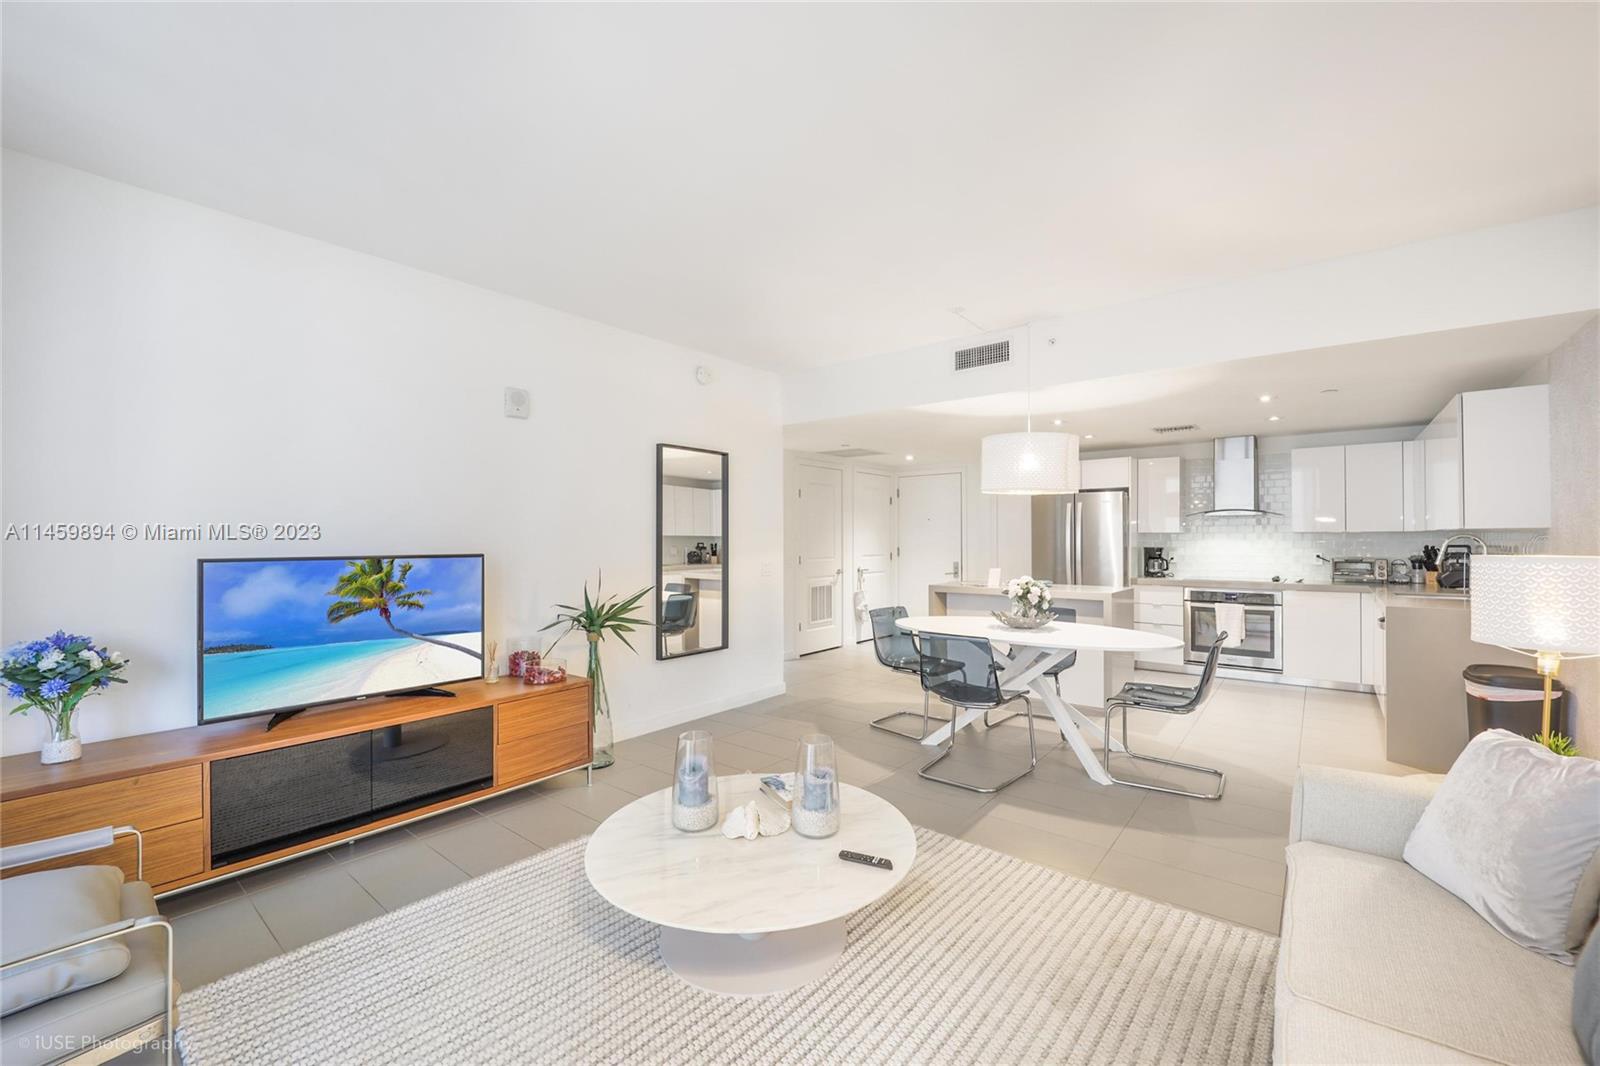 Beautiful and Spacious one-bedroom in the center of Miami. Ideal location close to everything. The building has some of the best amenities around and great management! Approved for 30 day min rentals!